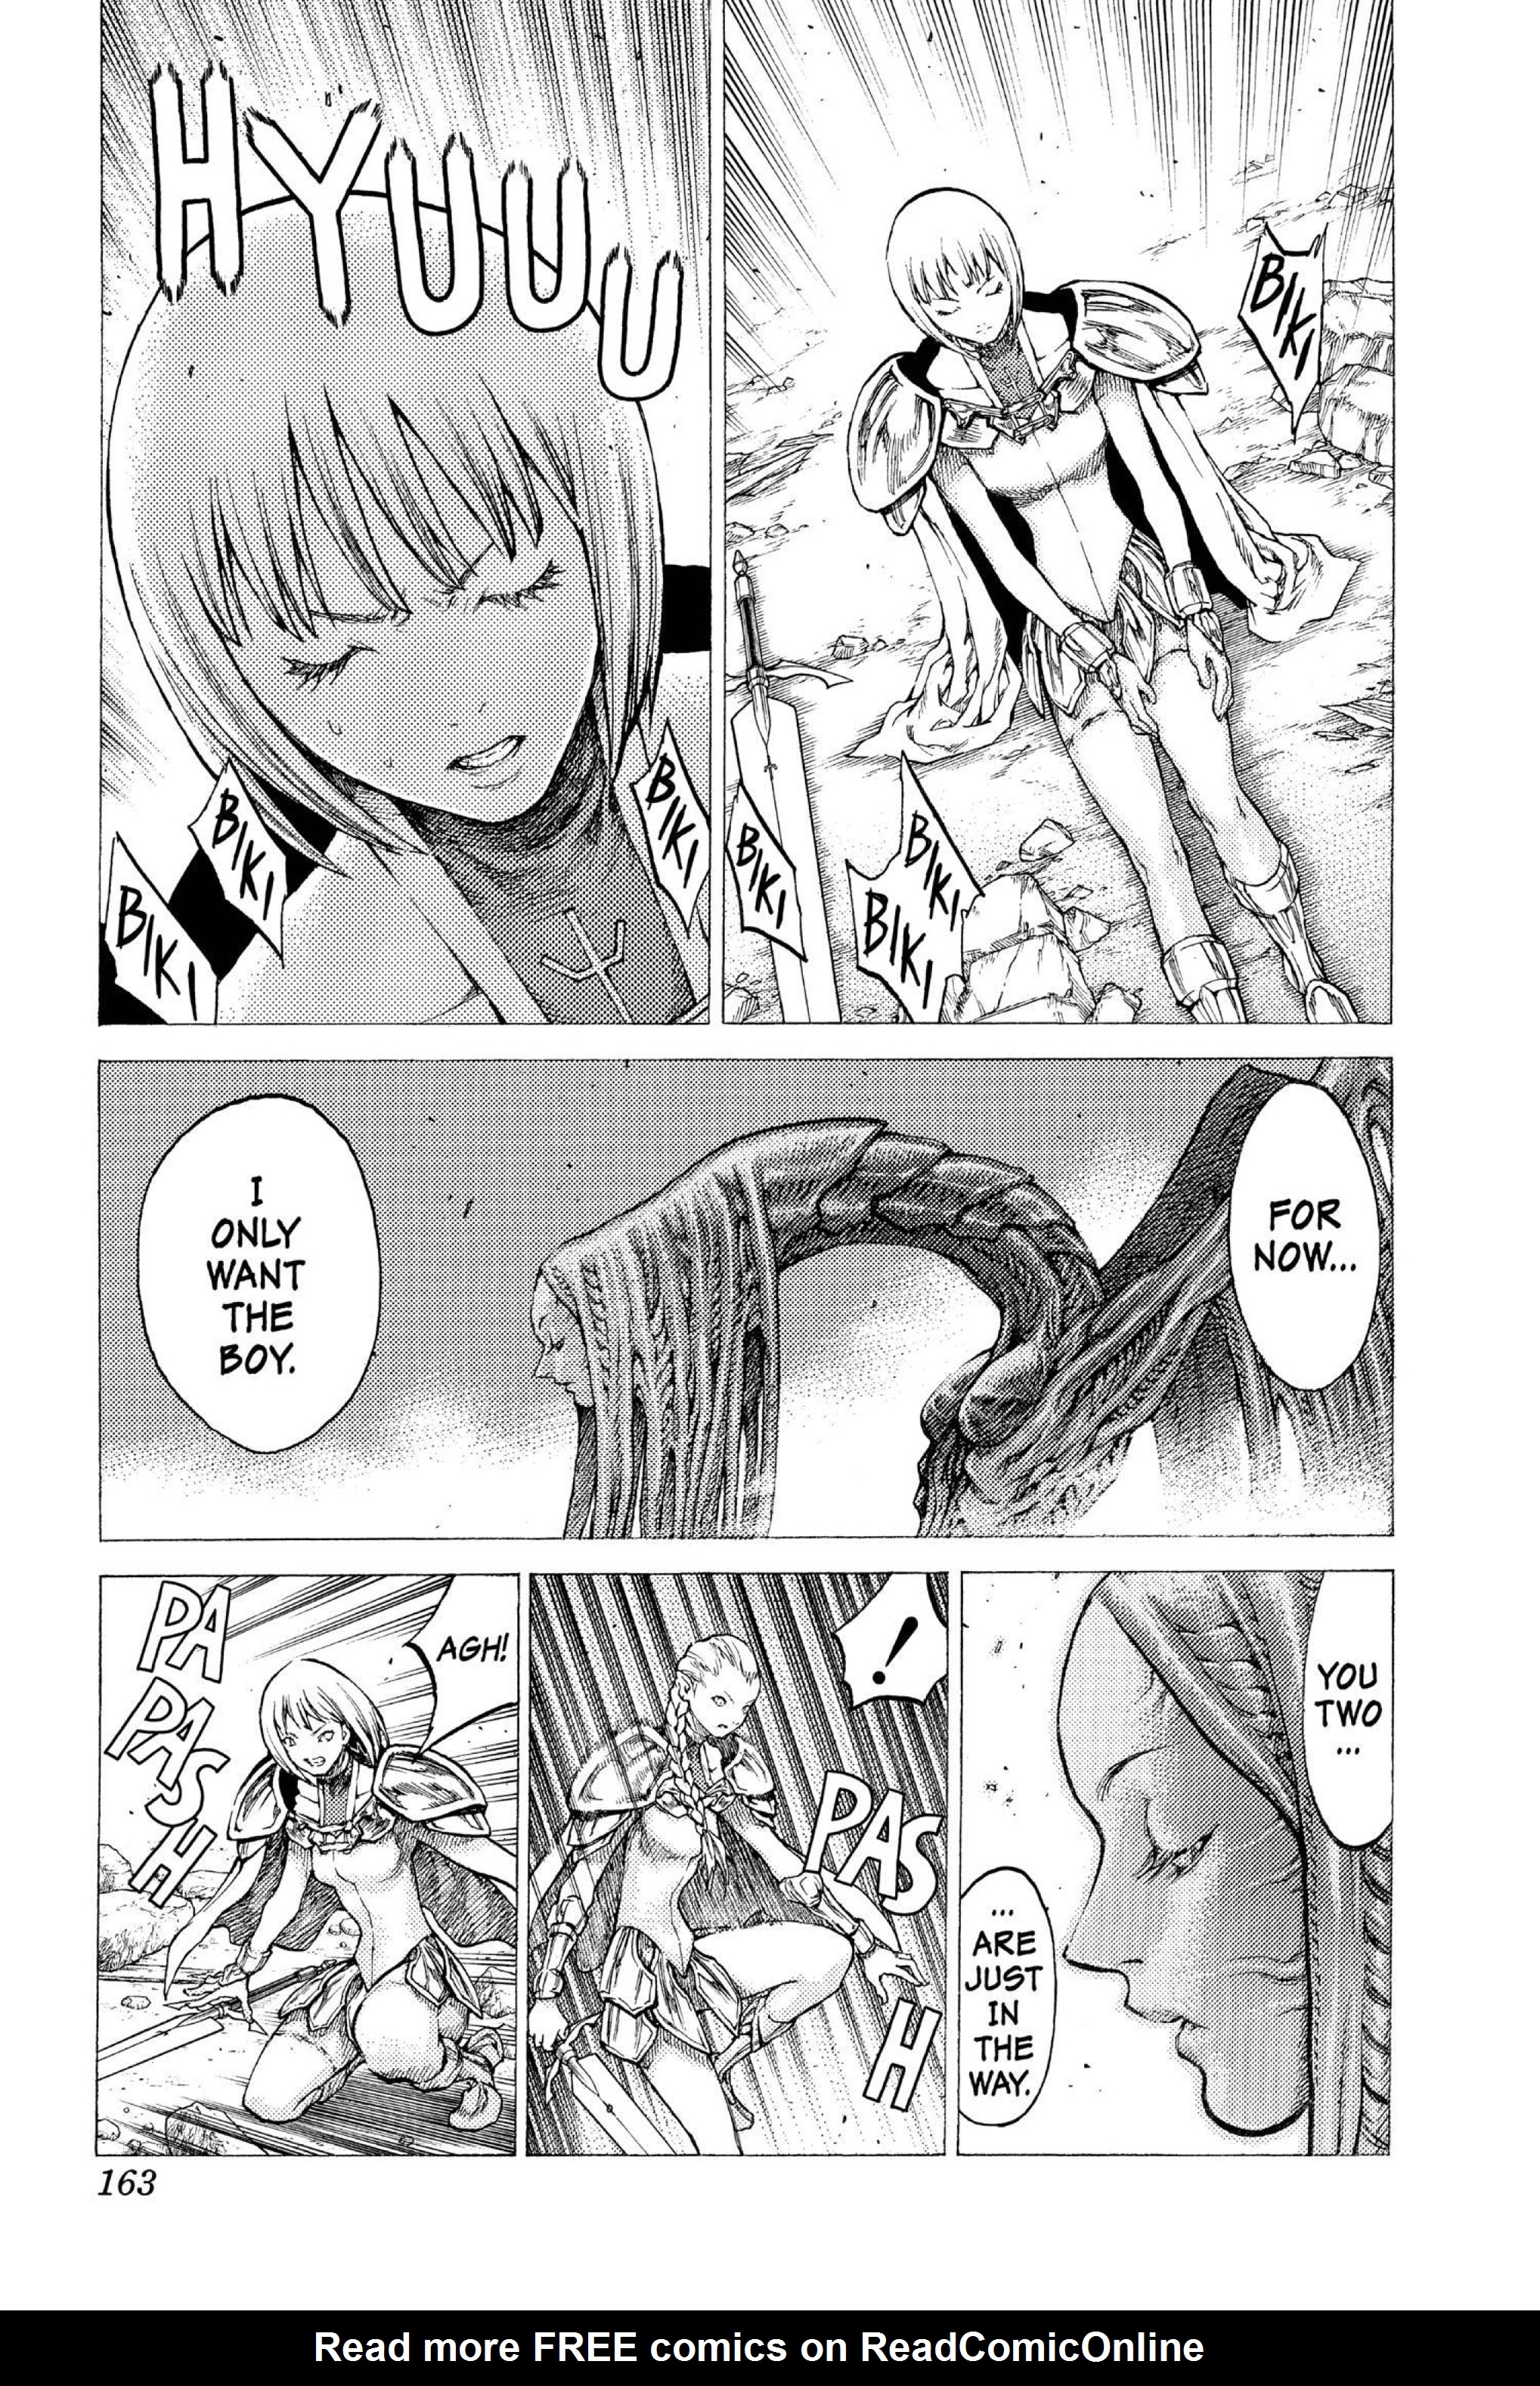 Read online Claymore comic -  Issue #6 - 154